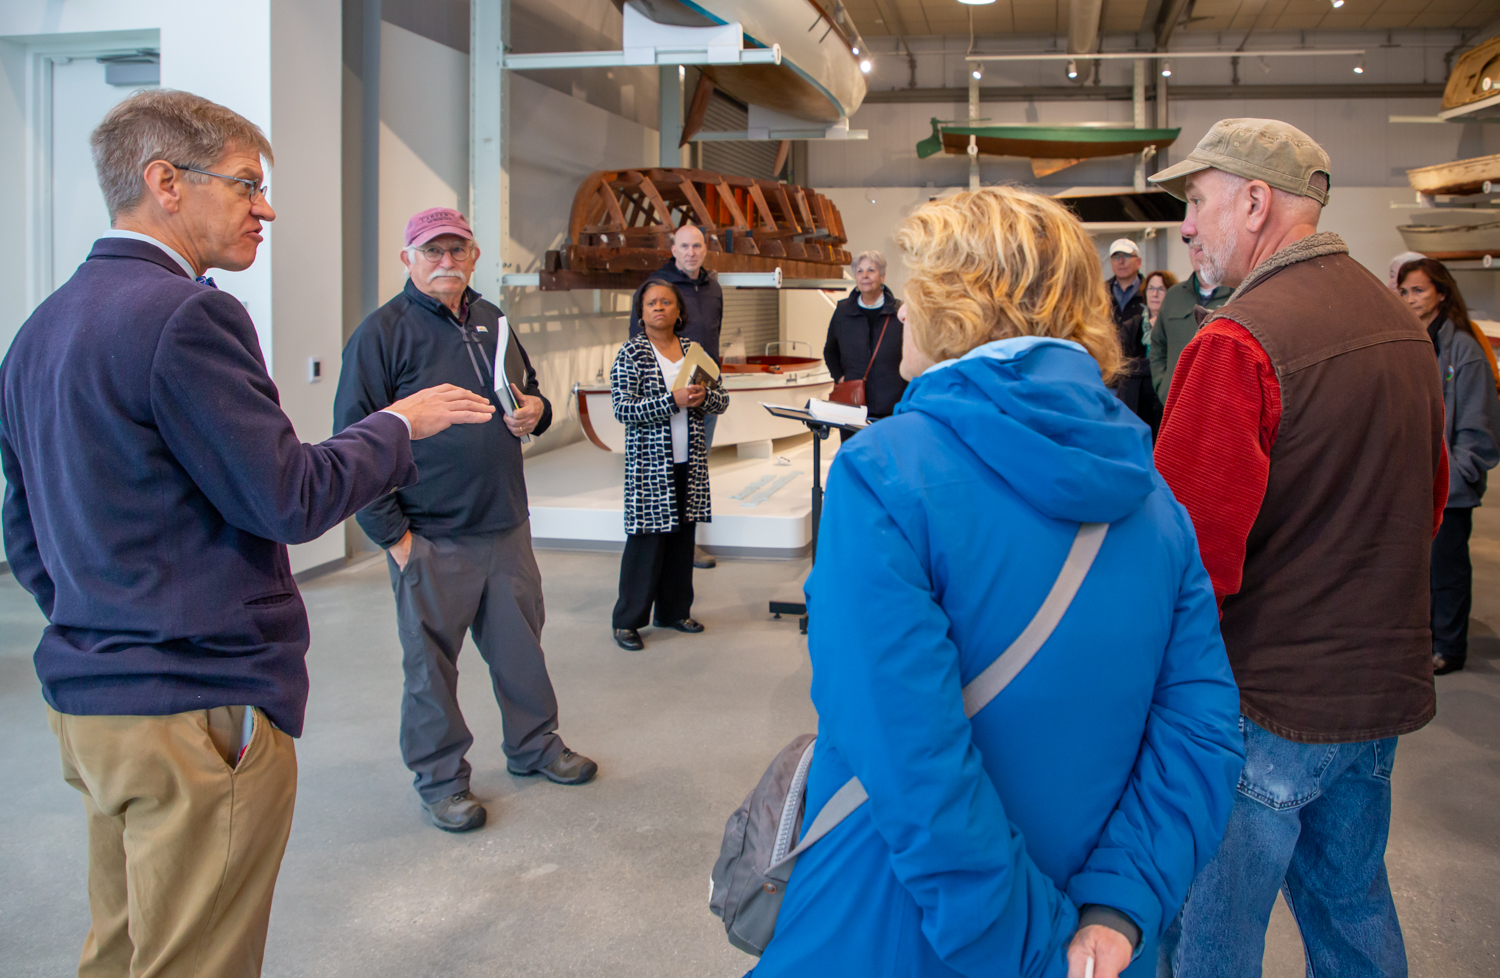 Pete Lesher on a tour of the new exhibitions in the Welcome Center.